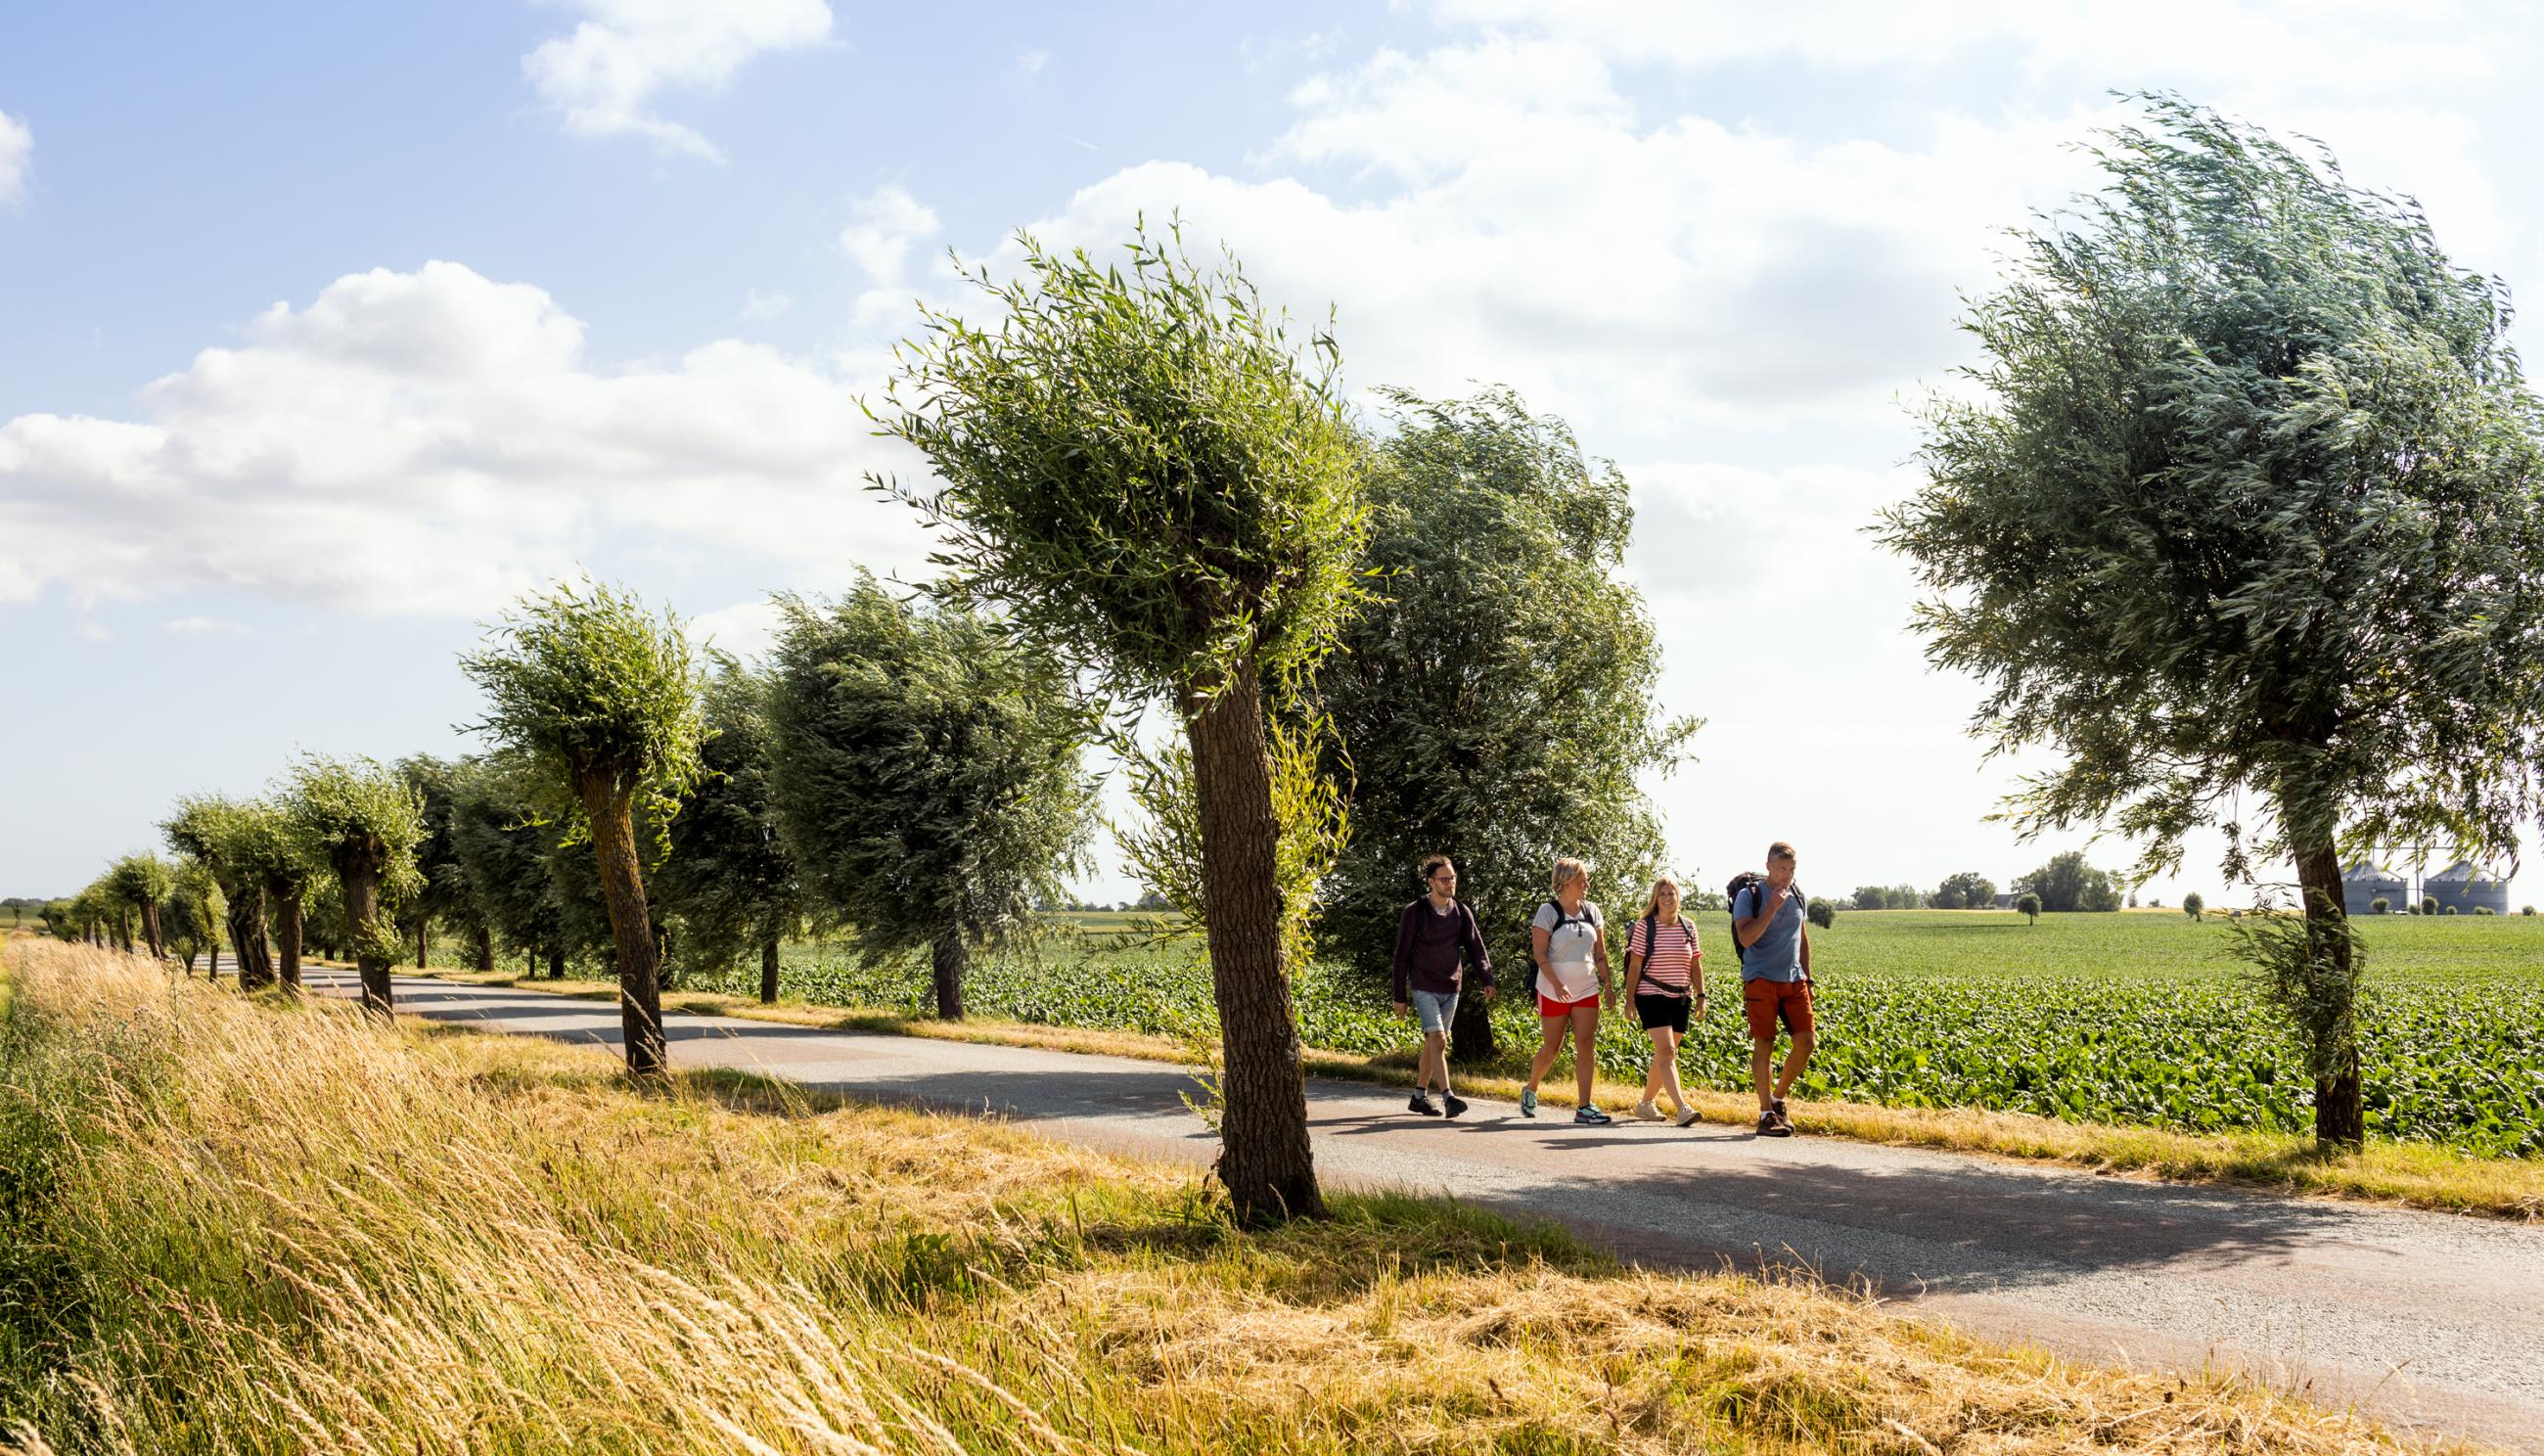 Four people hiking on a country road with fields around